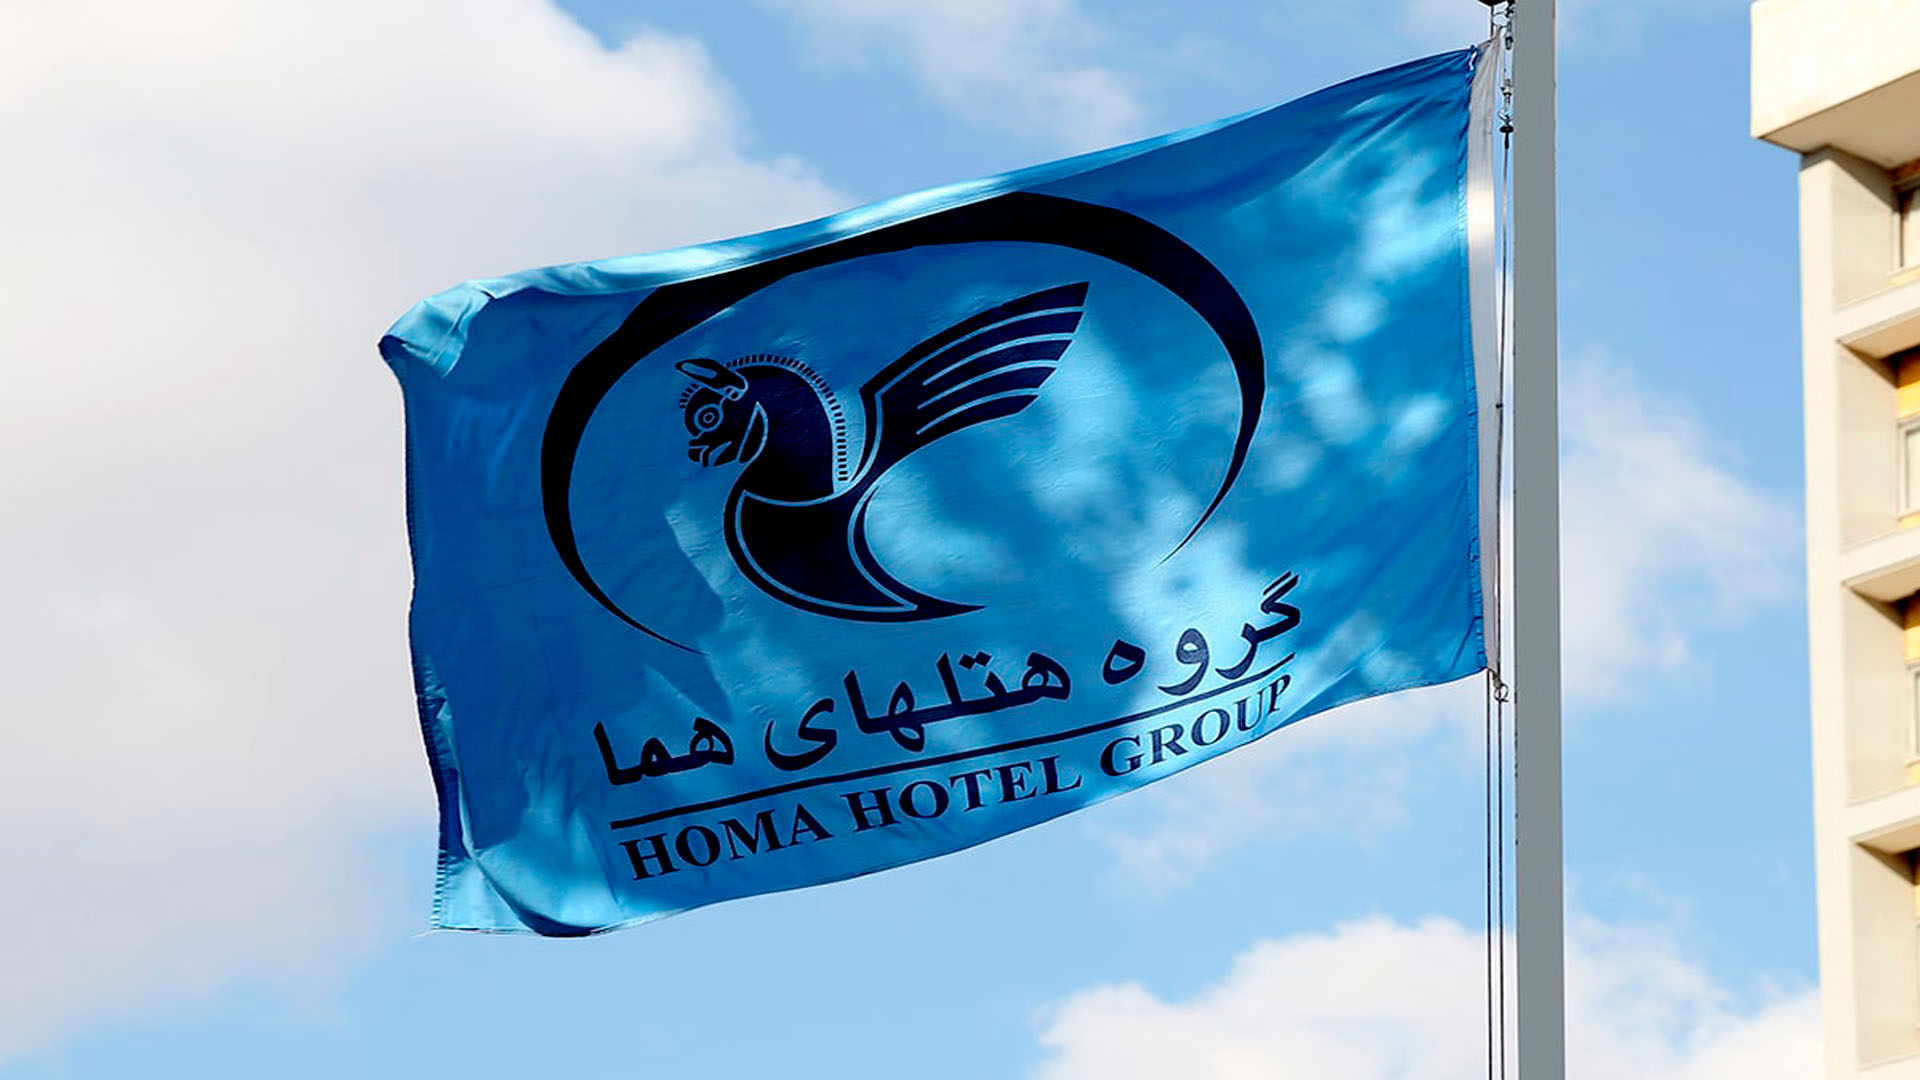 About Homa Hotels